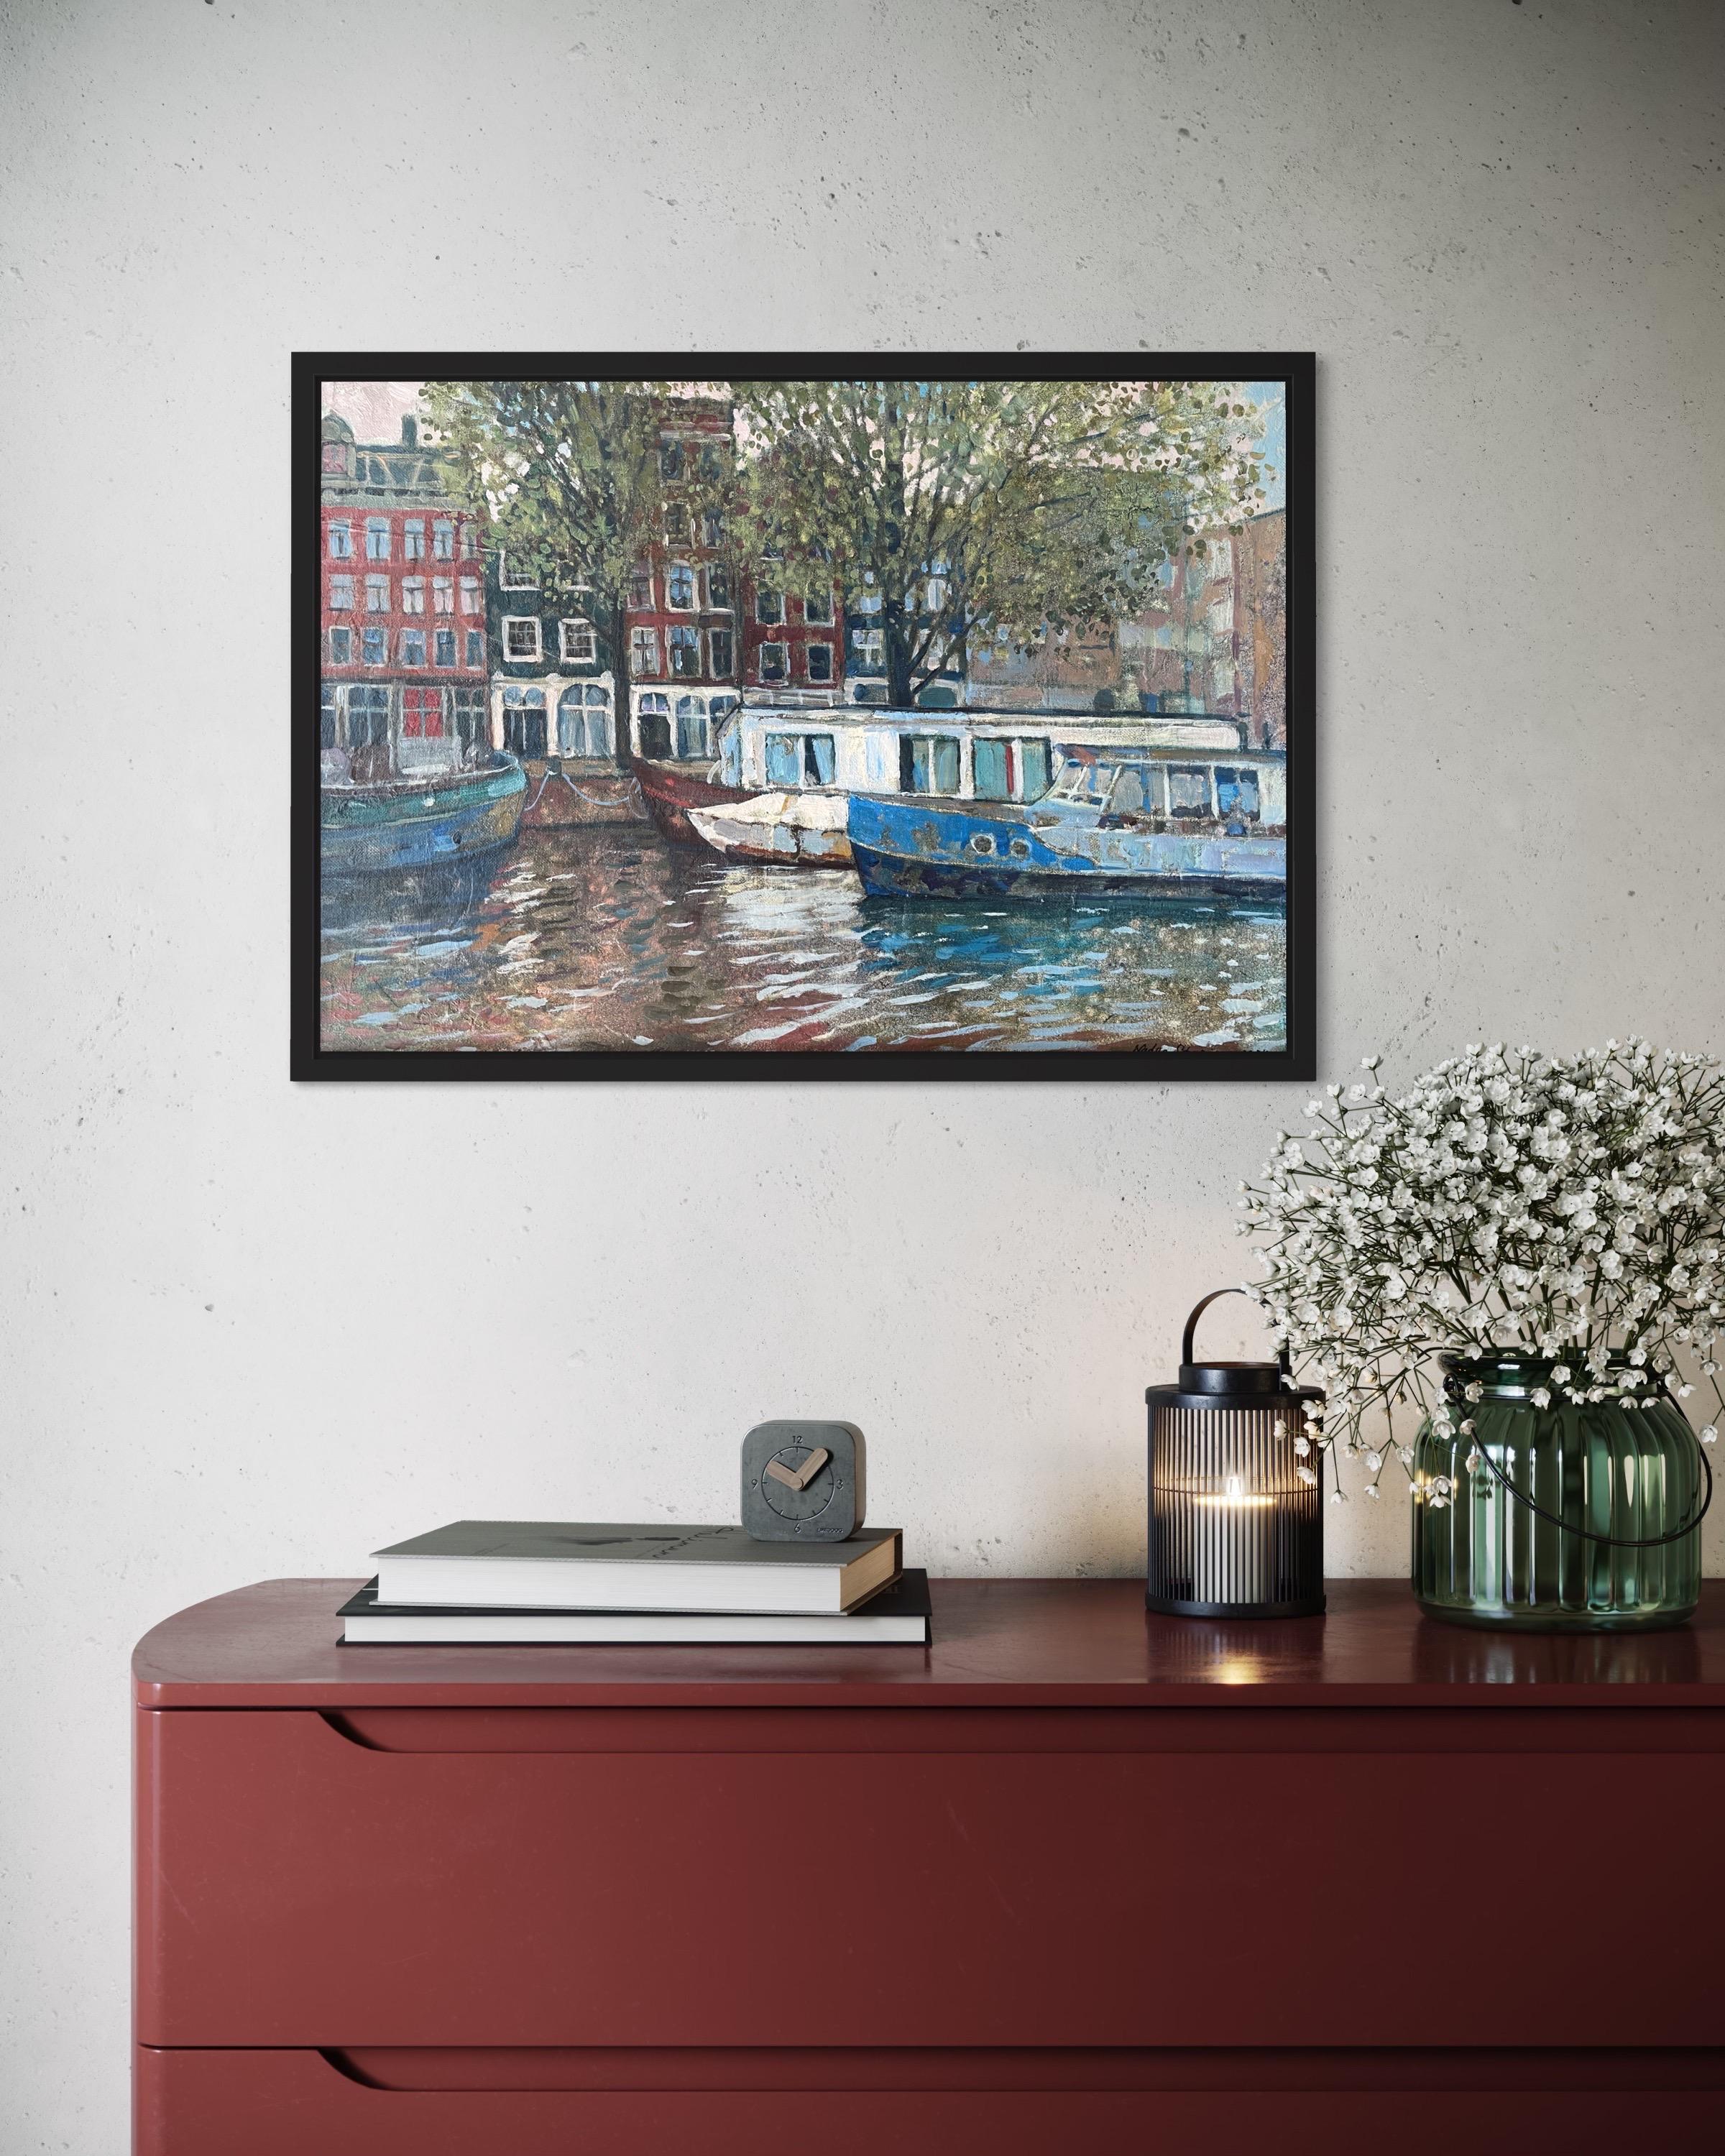 In this acrylic embrace of impressionism, my brushstrokes capture the gentle sway of life on the water, where boats whisper stories of travel and the history-soaked buildings watch over with silent tales. It's a testament to peaceful coexistence,